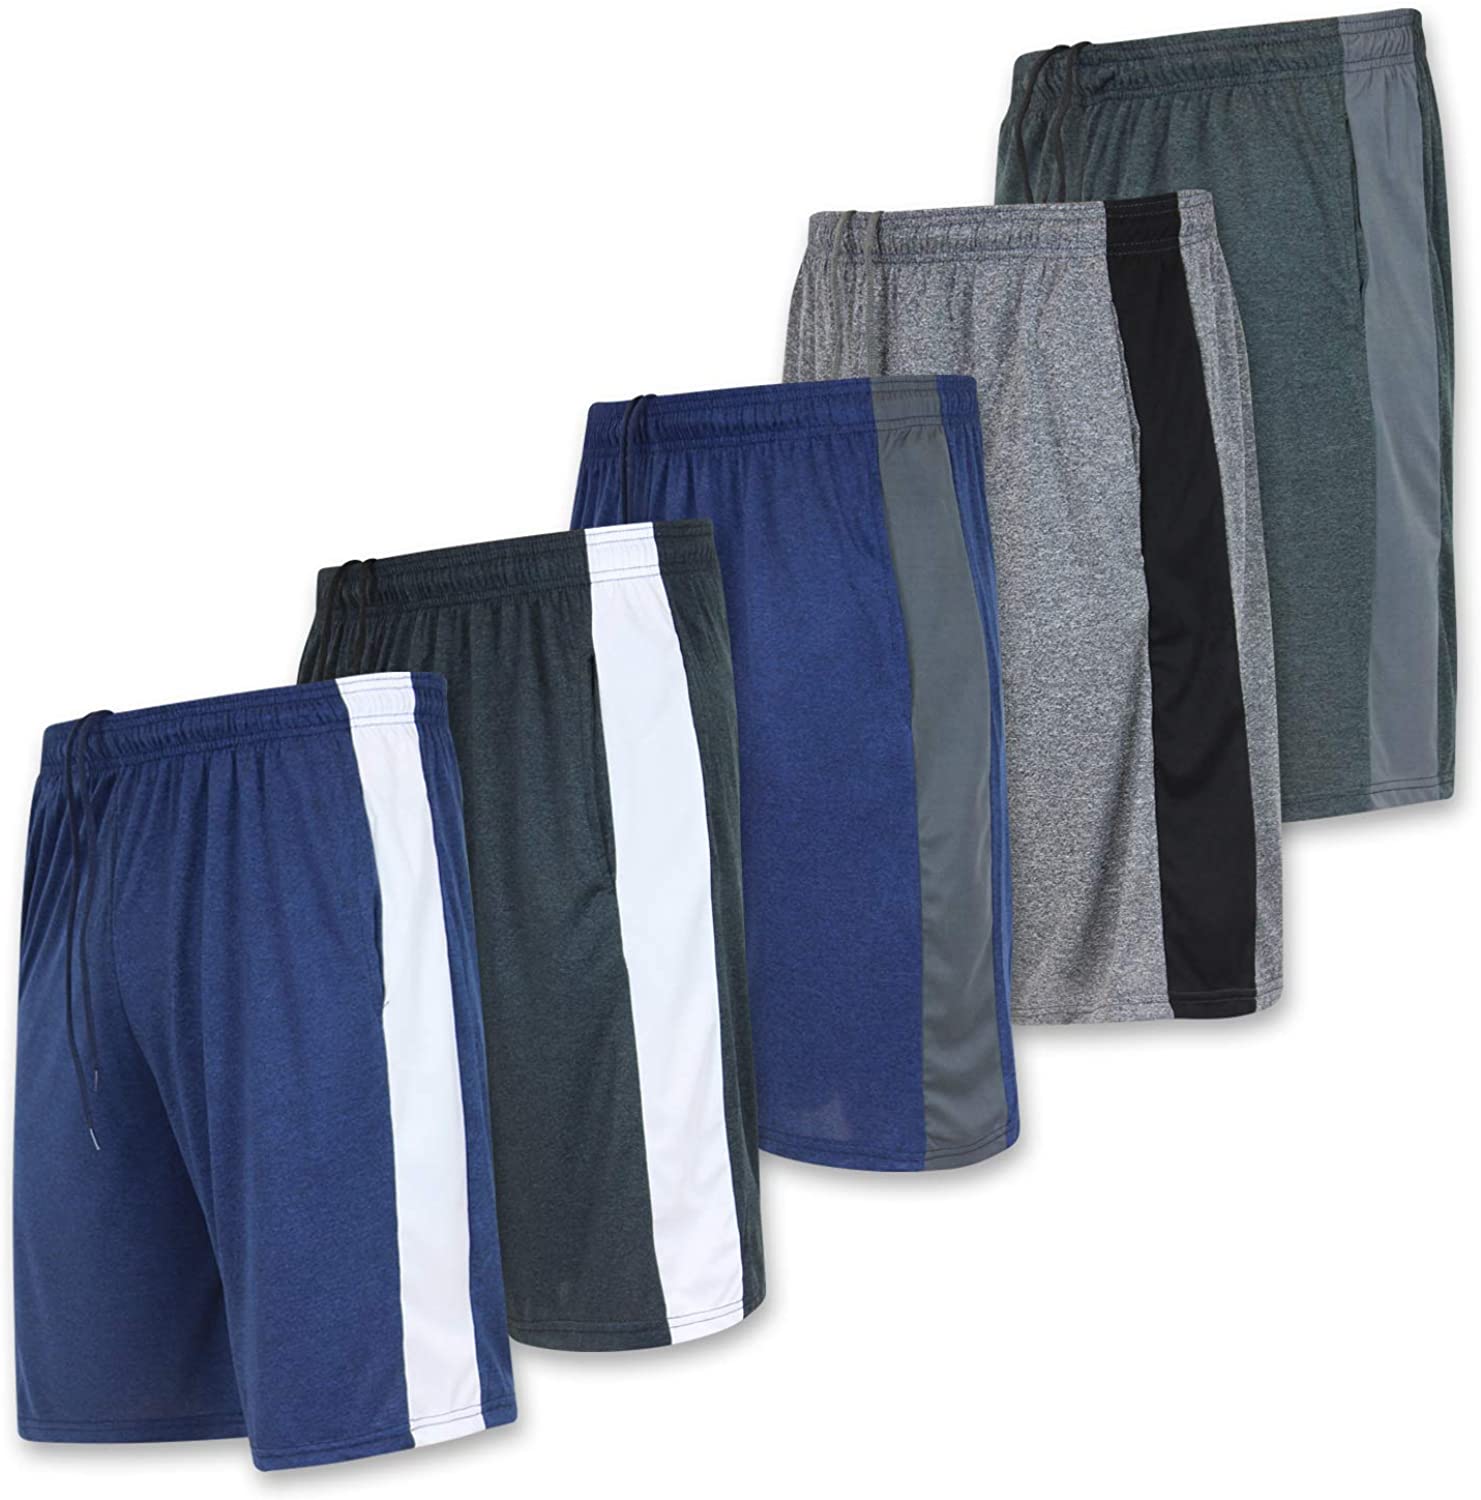 5 Pack:Men's Dry-Fit Sweat Resistant Active Athletic Performance